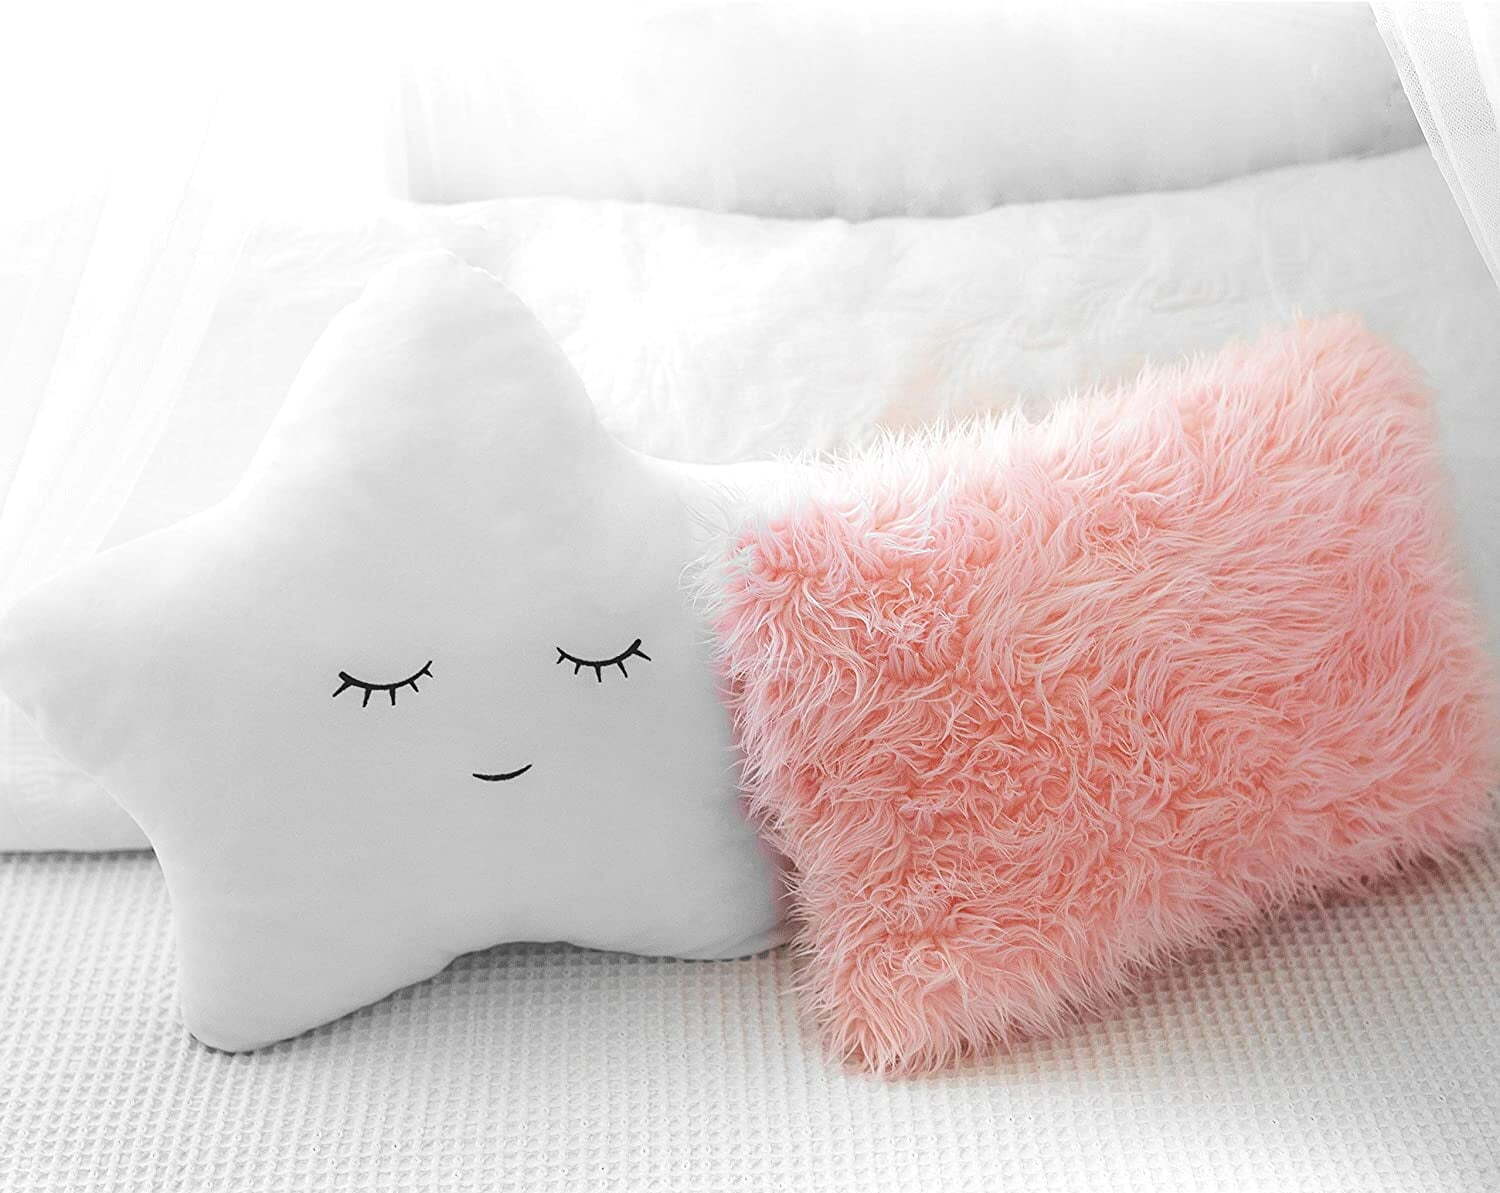 Soft Plush Heart Pillow Cover Plush Heart-shaped Pillowcases Fluffy  Decorative Throw Pillows Gifts for Women Girls for Christmas - AliExpress